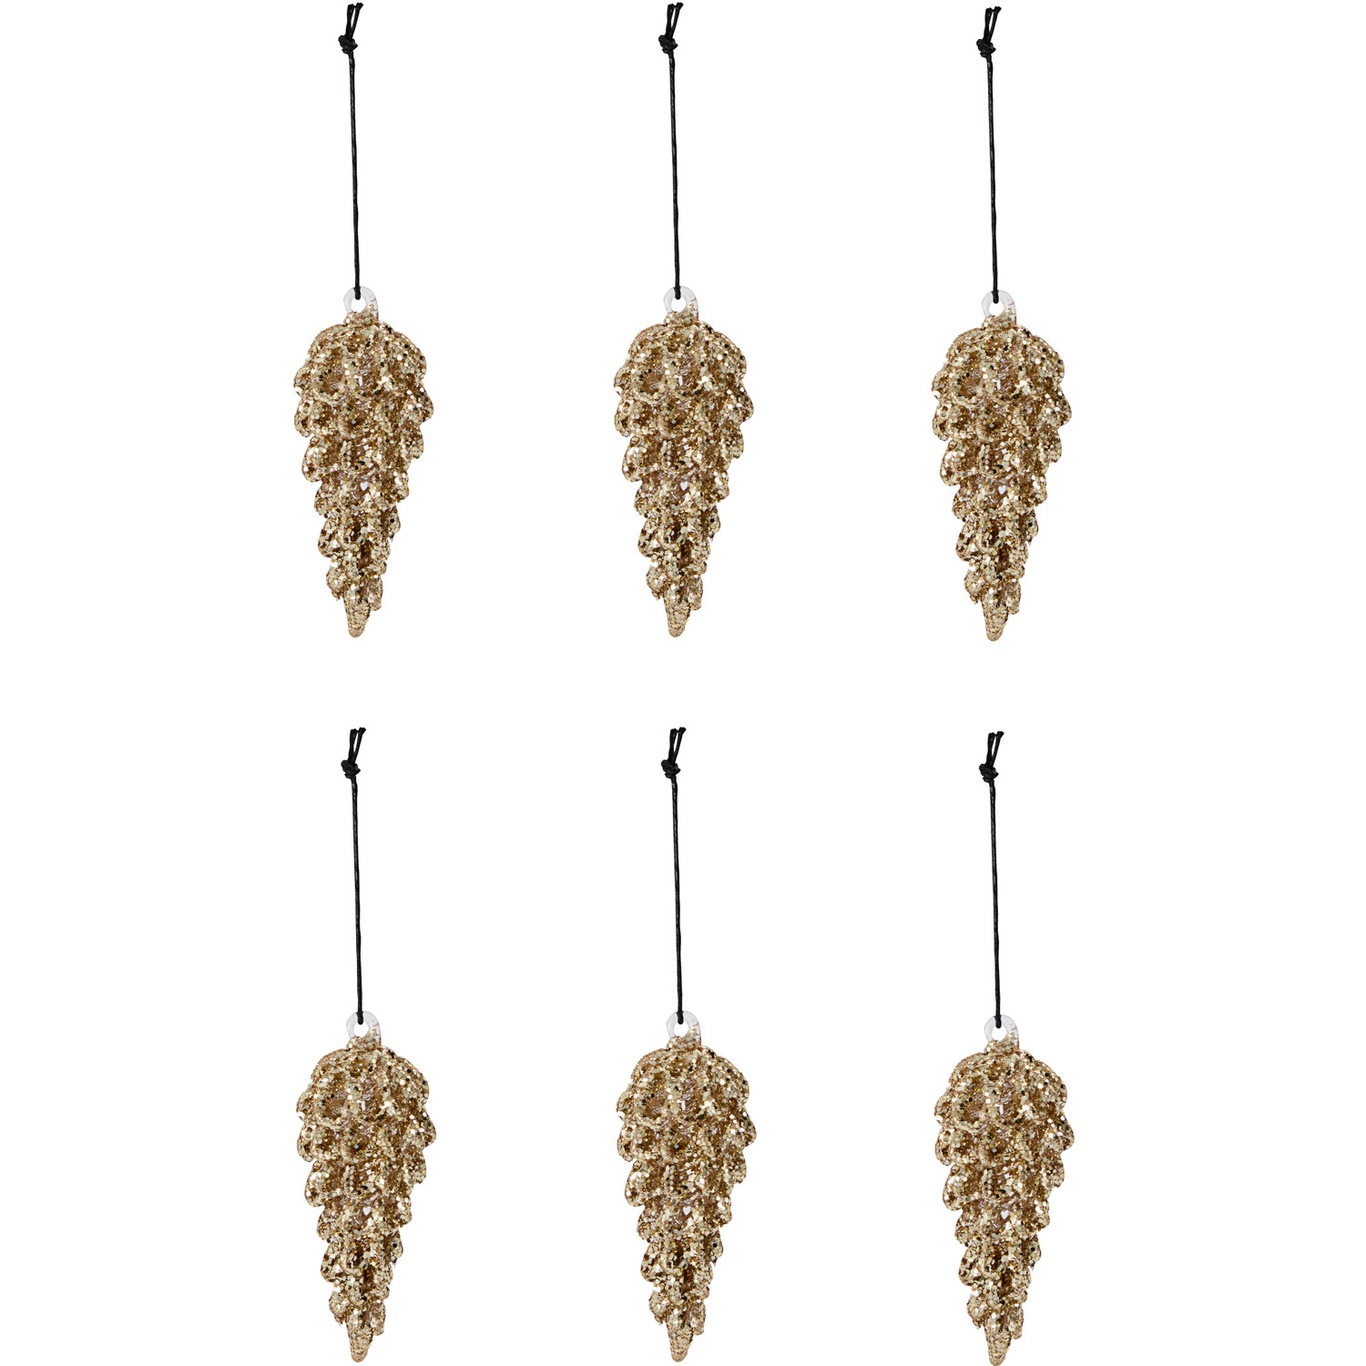 Cone Christmas Decorations 6-pack 3,5x9 cm, Gold